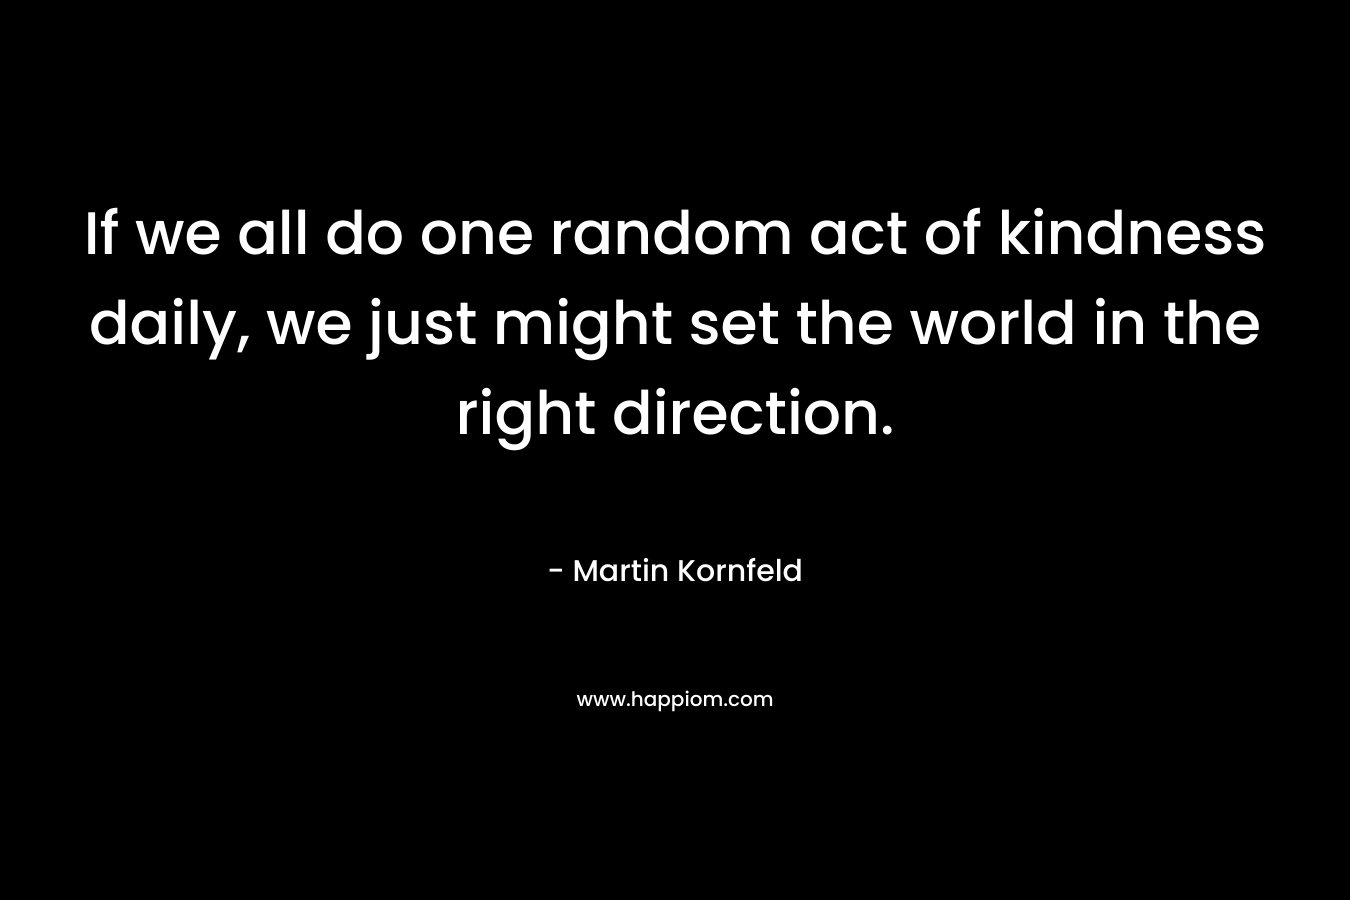 If we all do one random act of kindness daily, we just might set the world in the right direction. – Martin Kornfeld